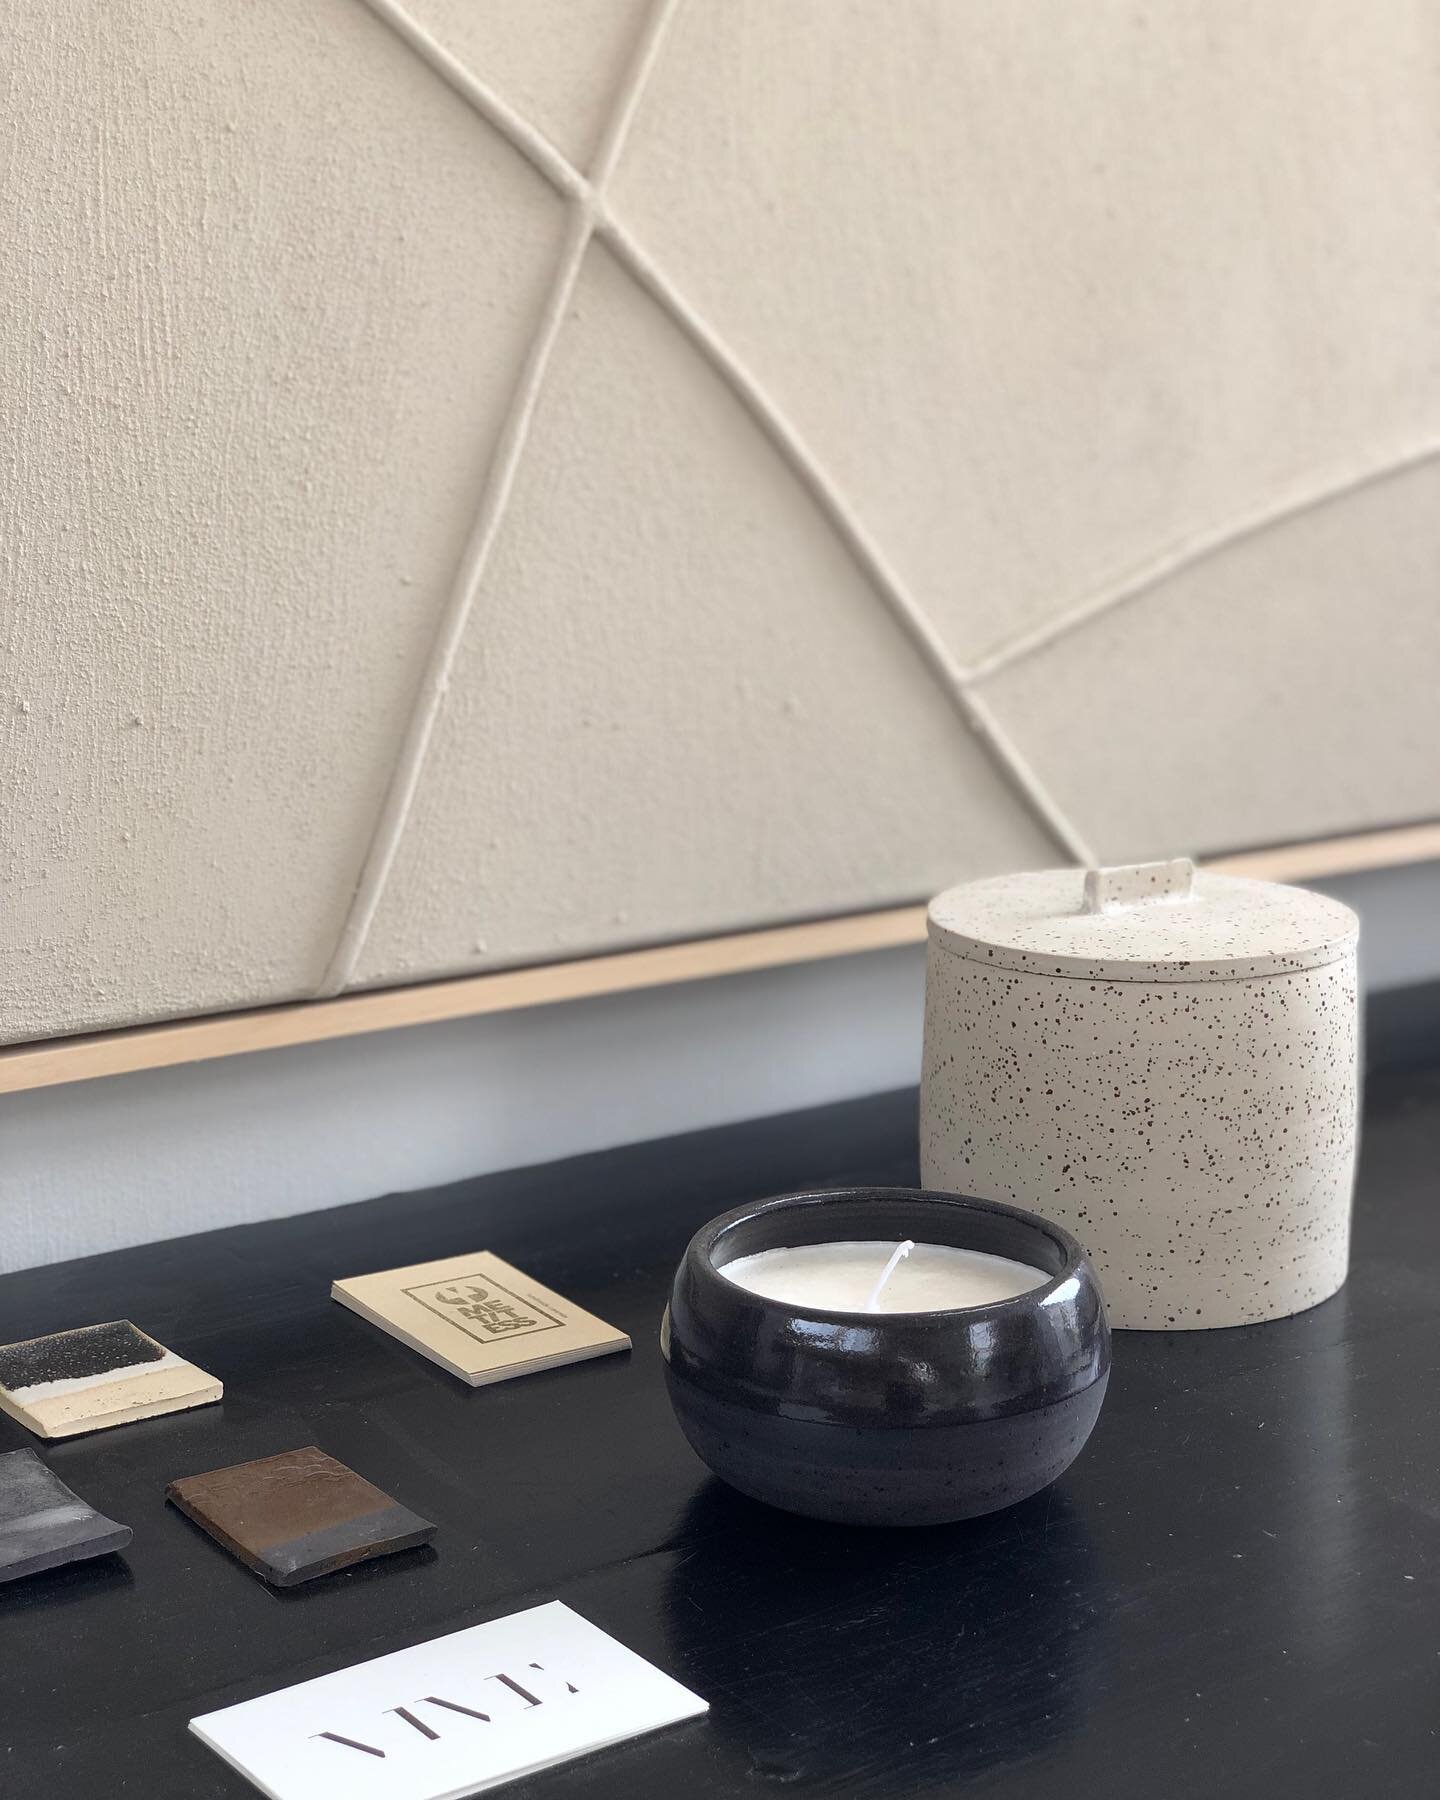 Serenity in our studio is everything. To clear the mind and create. Details from a Lifeline ~ artpiece 120&bull;160 together with these new scented handmade ceramic candles by @tessymettes. #serenity #clearthemind #studio #art #ceramics #scentedcandl